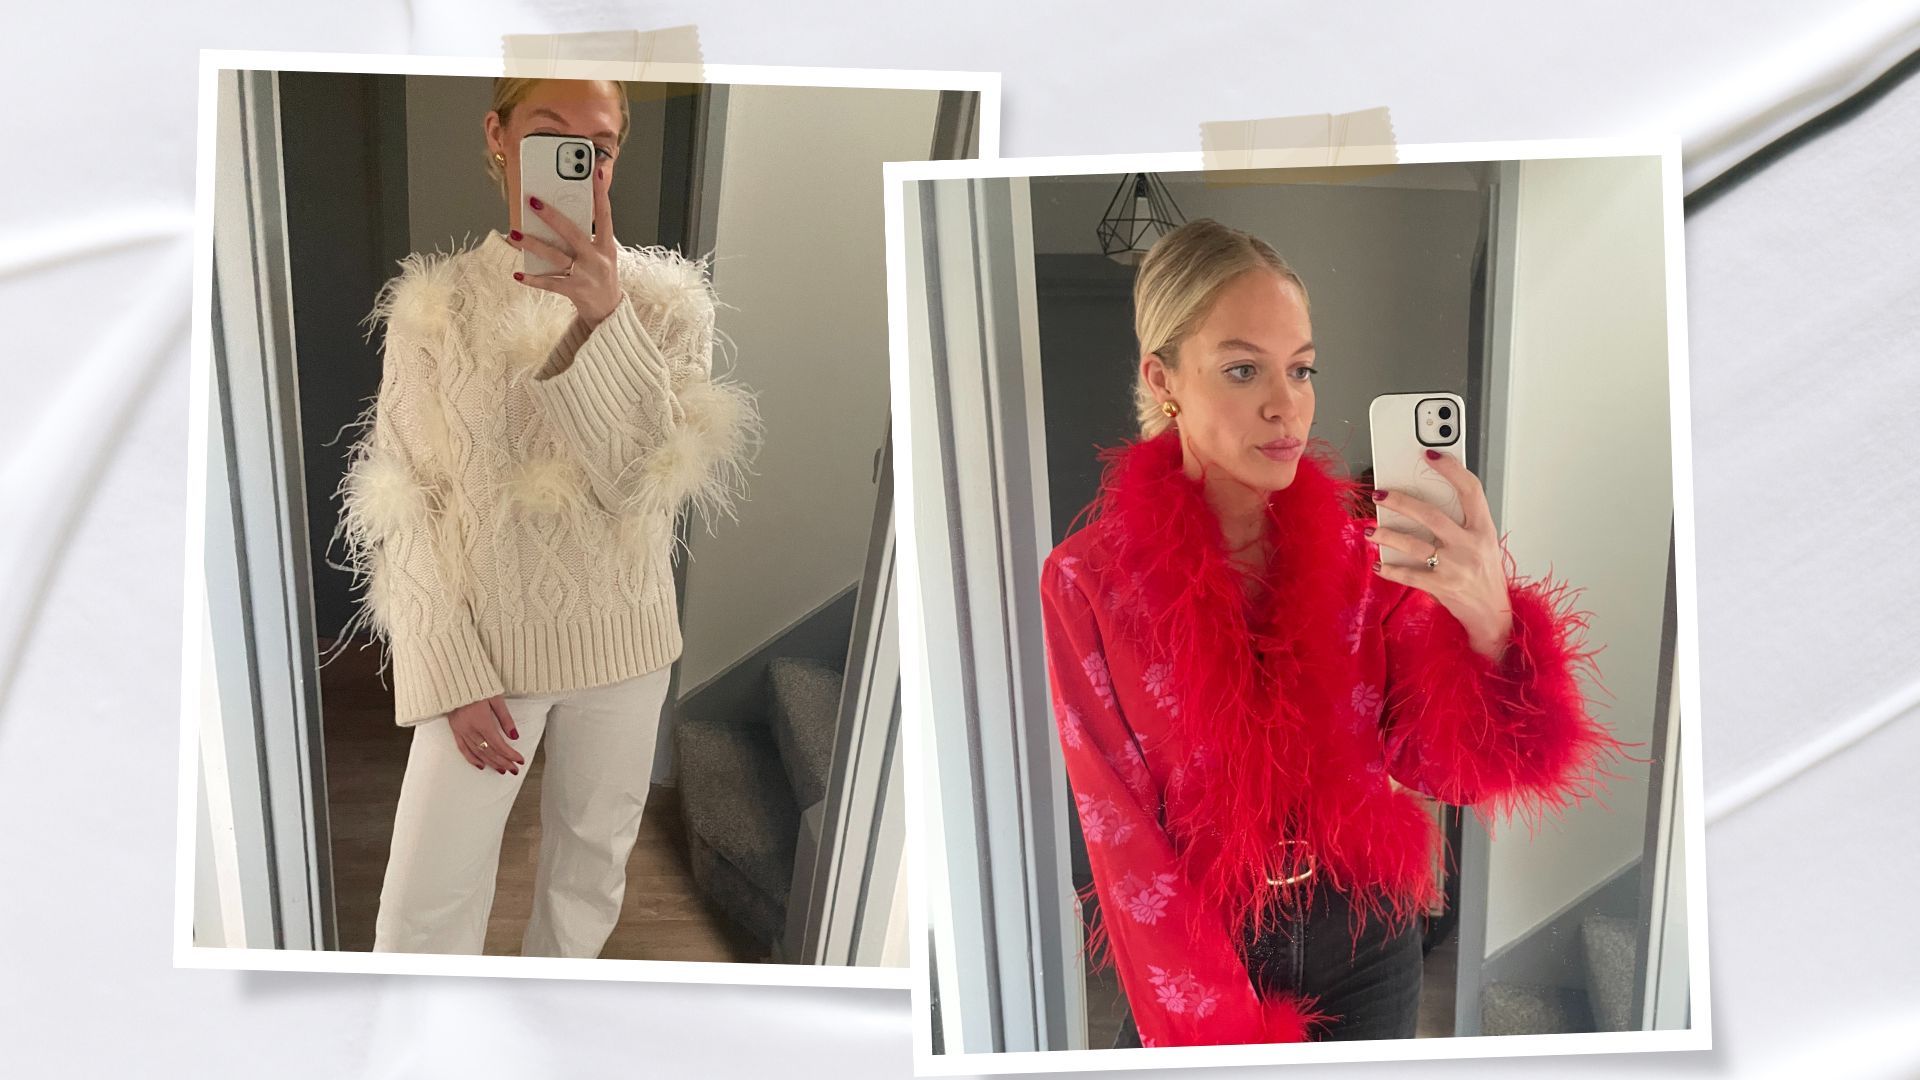 Ways to wear feathers this party season